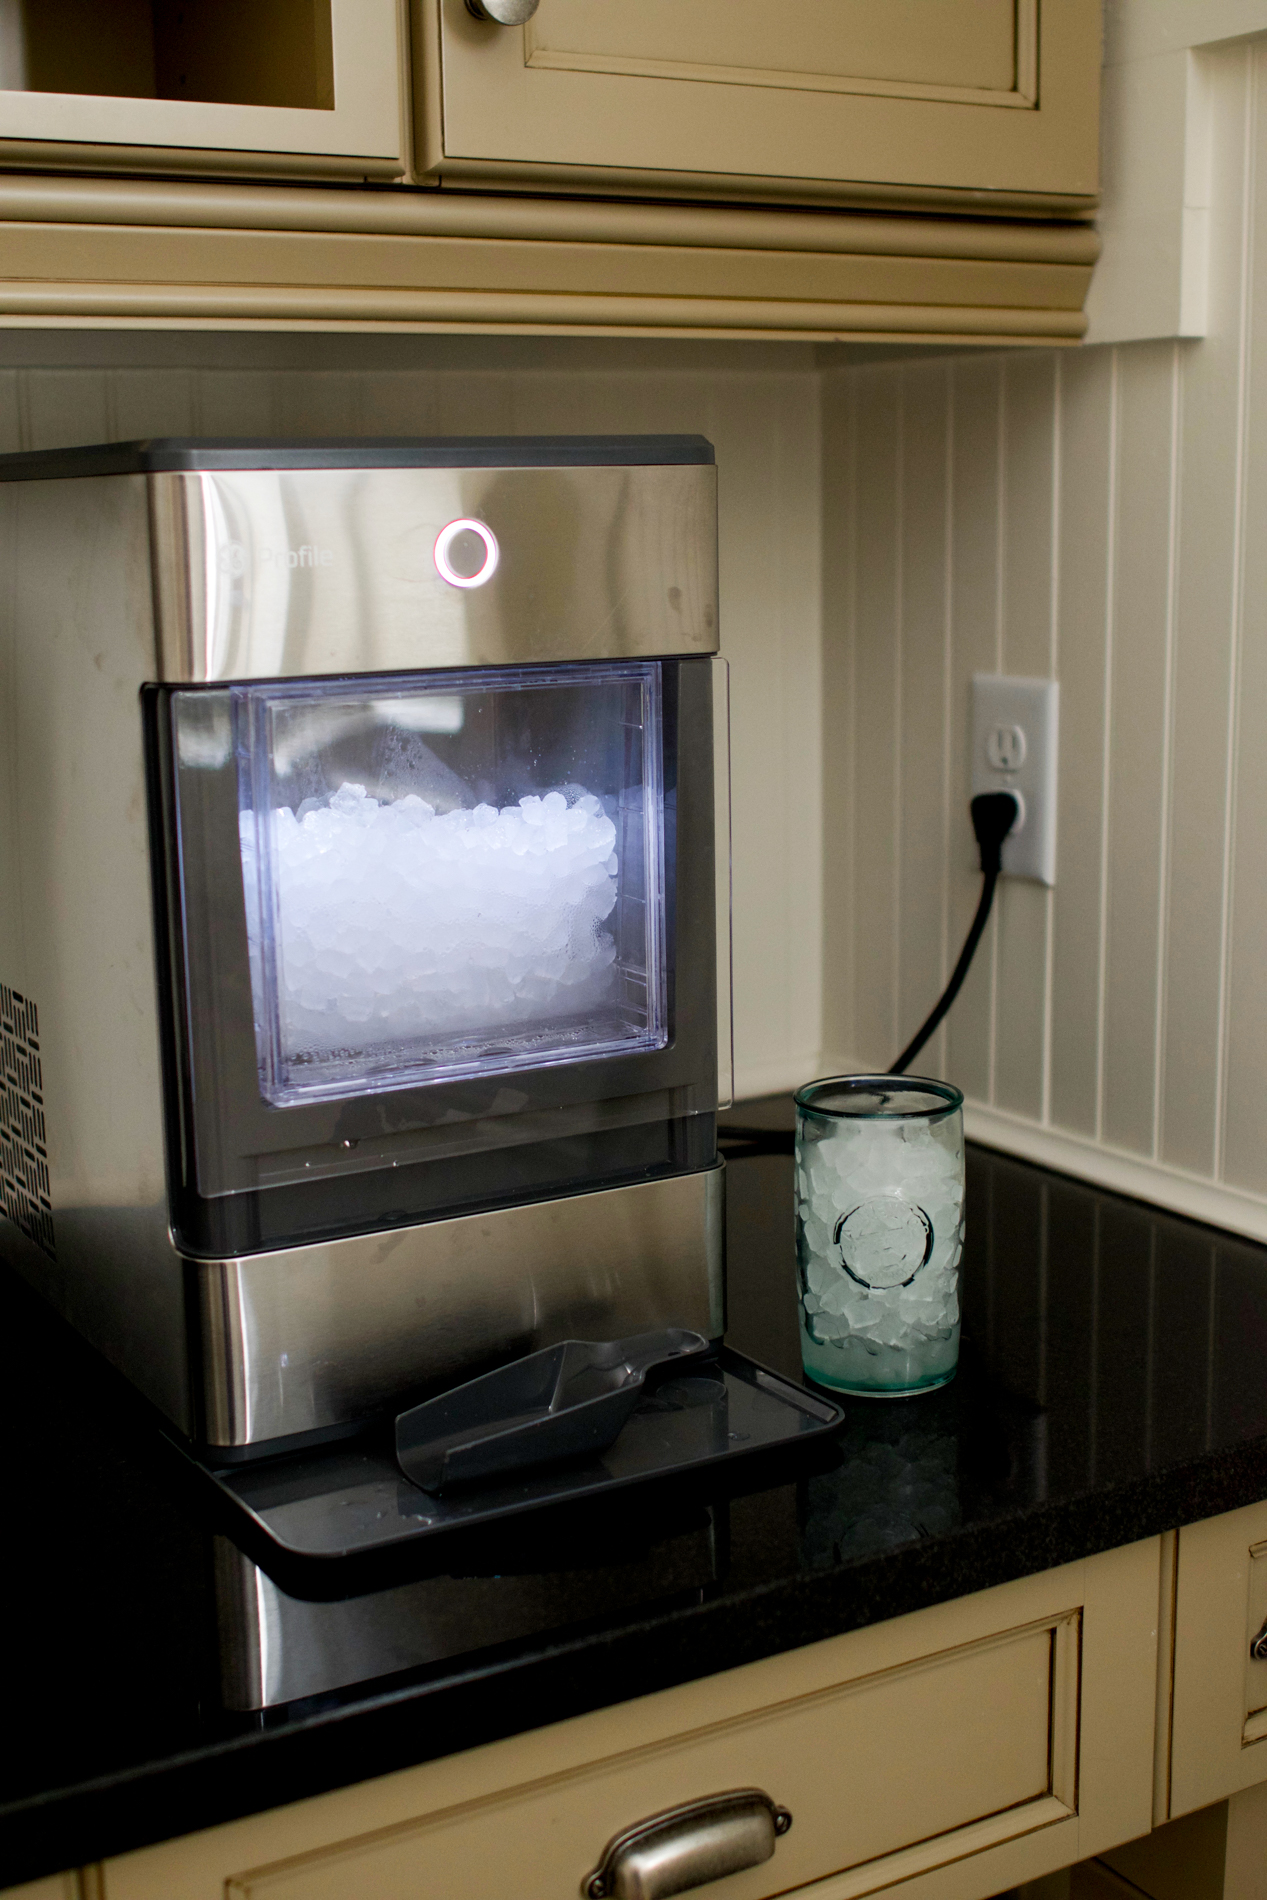 I got the Opal Nugget Ice Maker and Here are My Thoughts - The